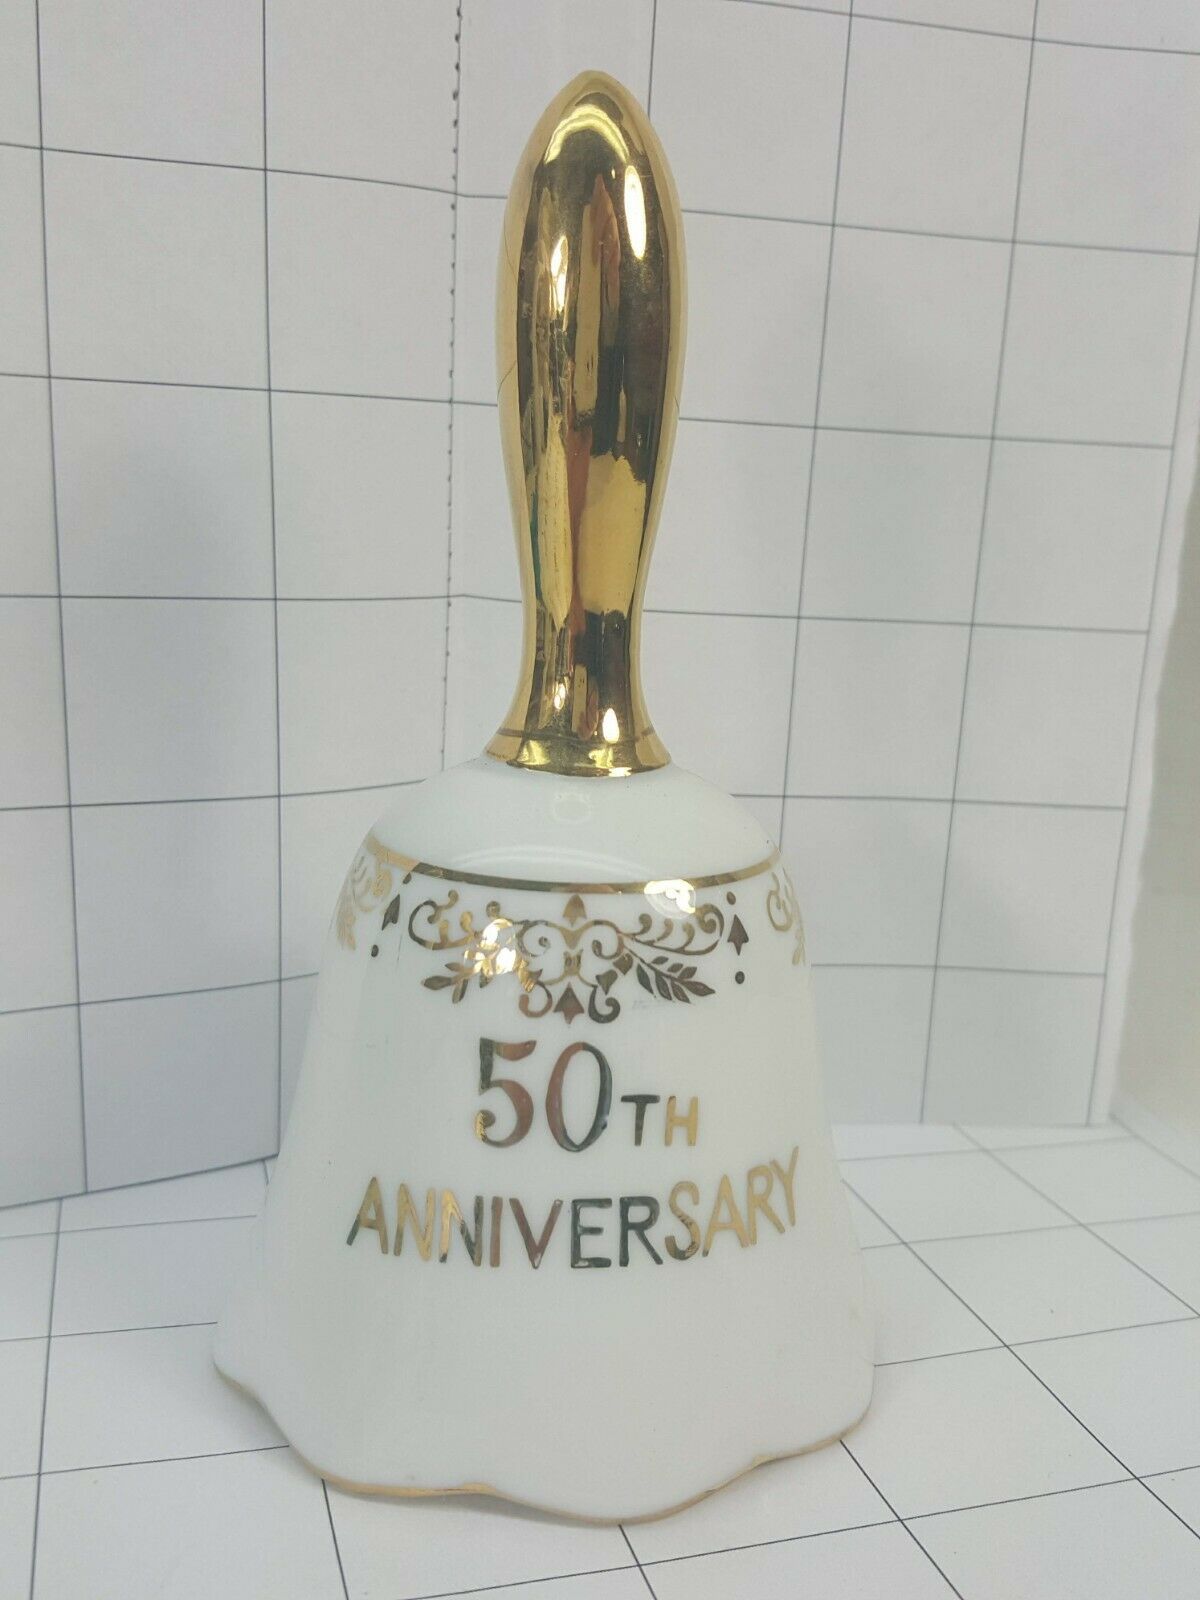 Primary image for Anniversary Collector Bell "50th ANNIVERSARY"  white with gold #33